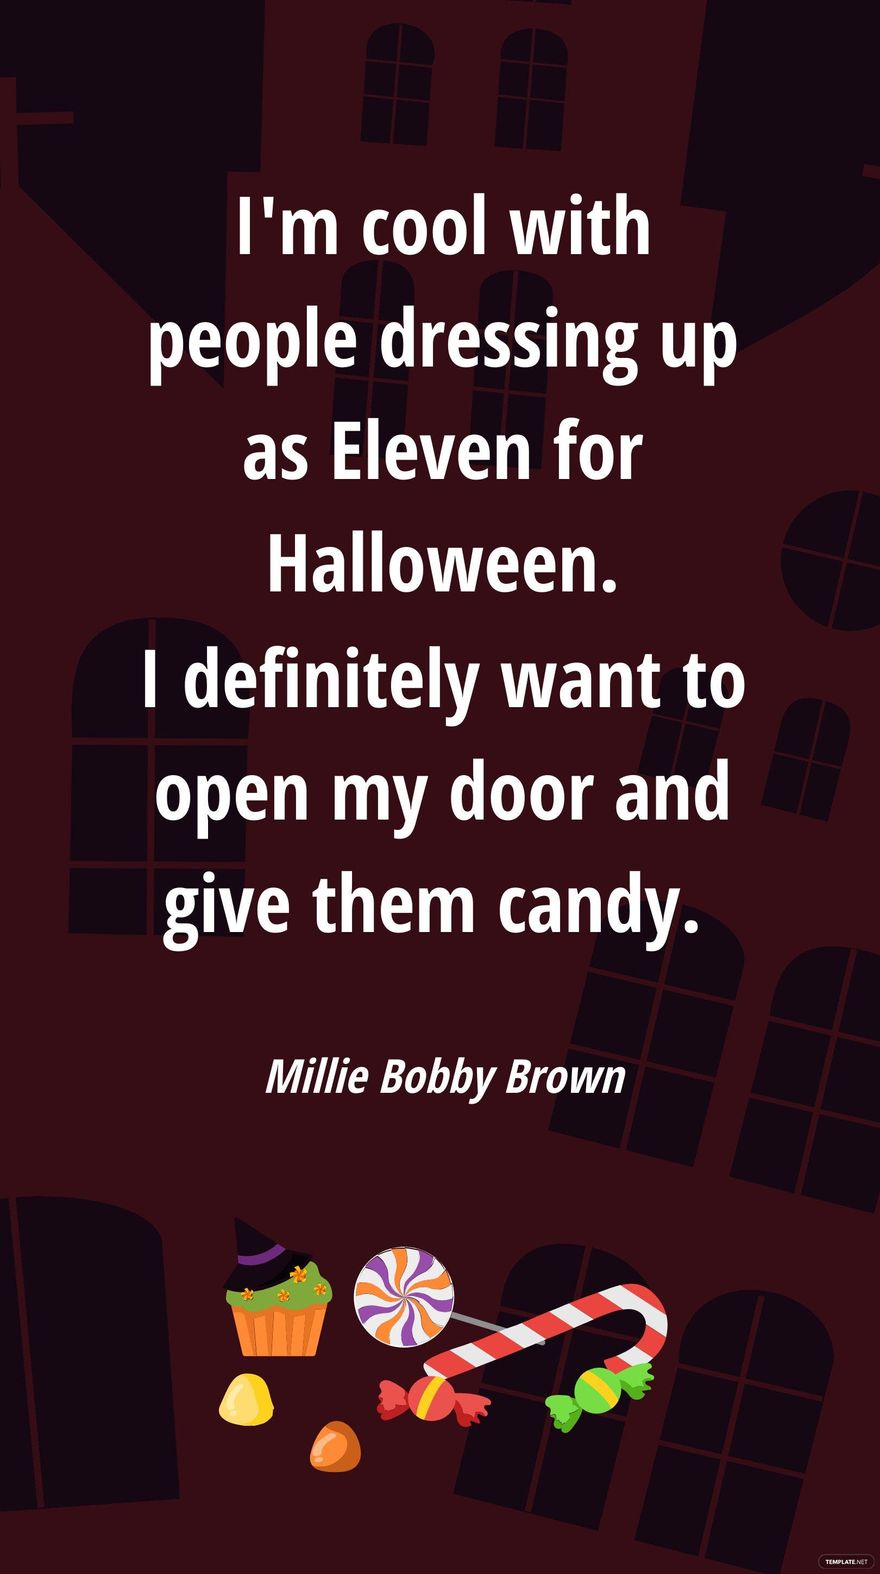 Free Millie Bobby Brown - I'm cool with people dressing up as Eleven for Halloween. I definitely want to open my door and give them candy. in JPG